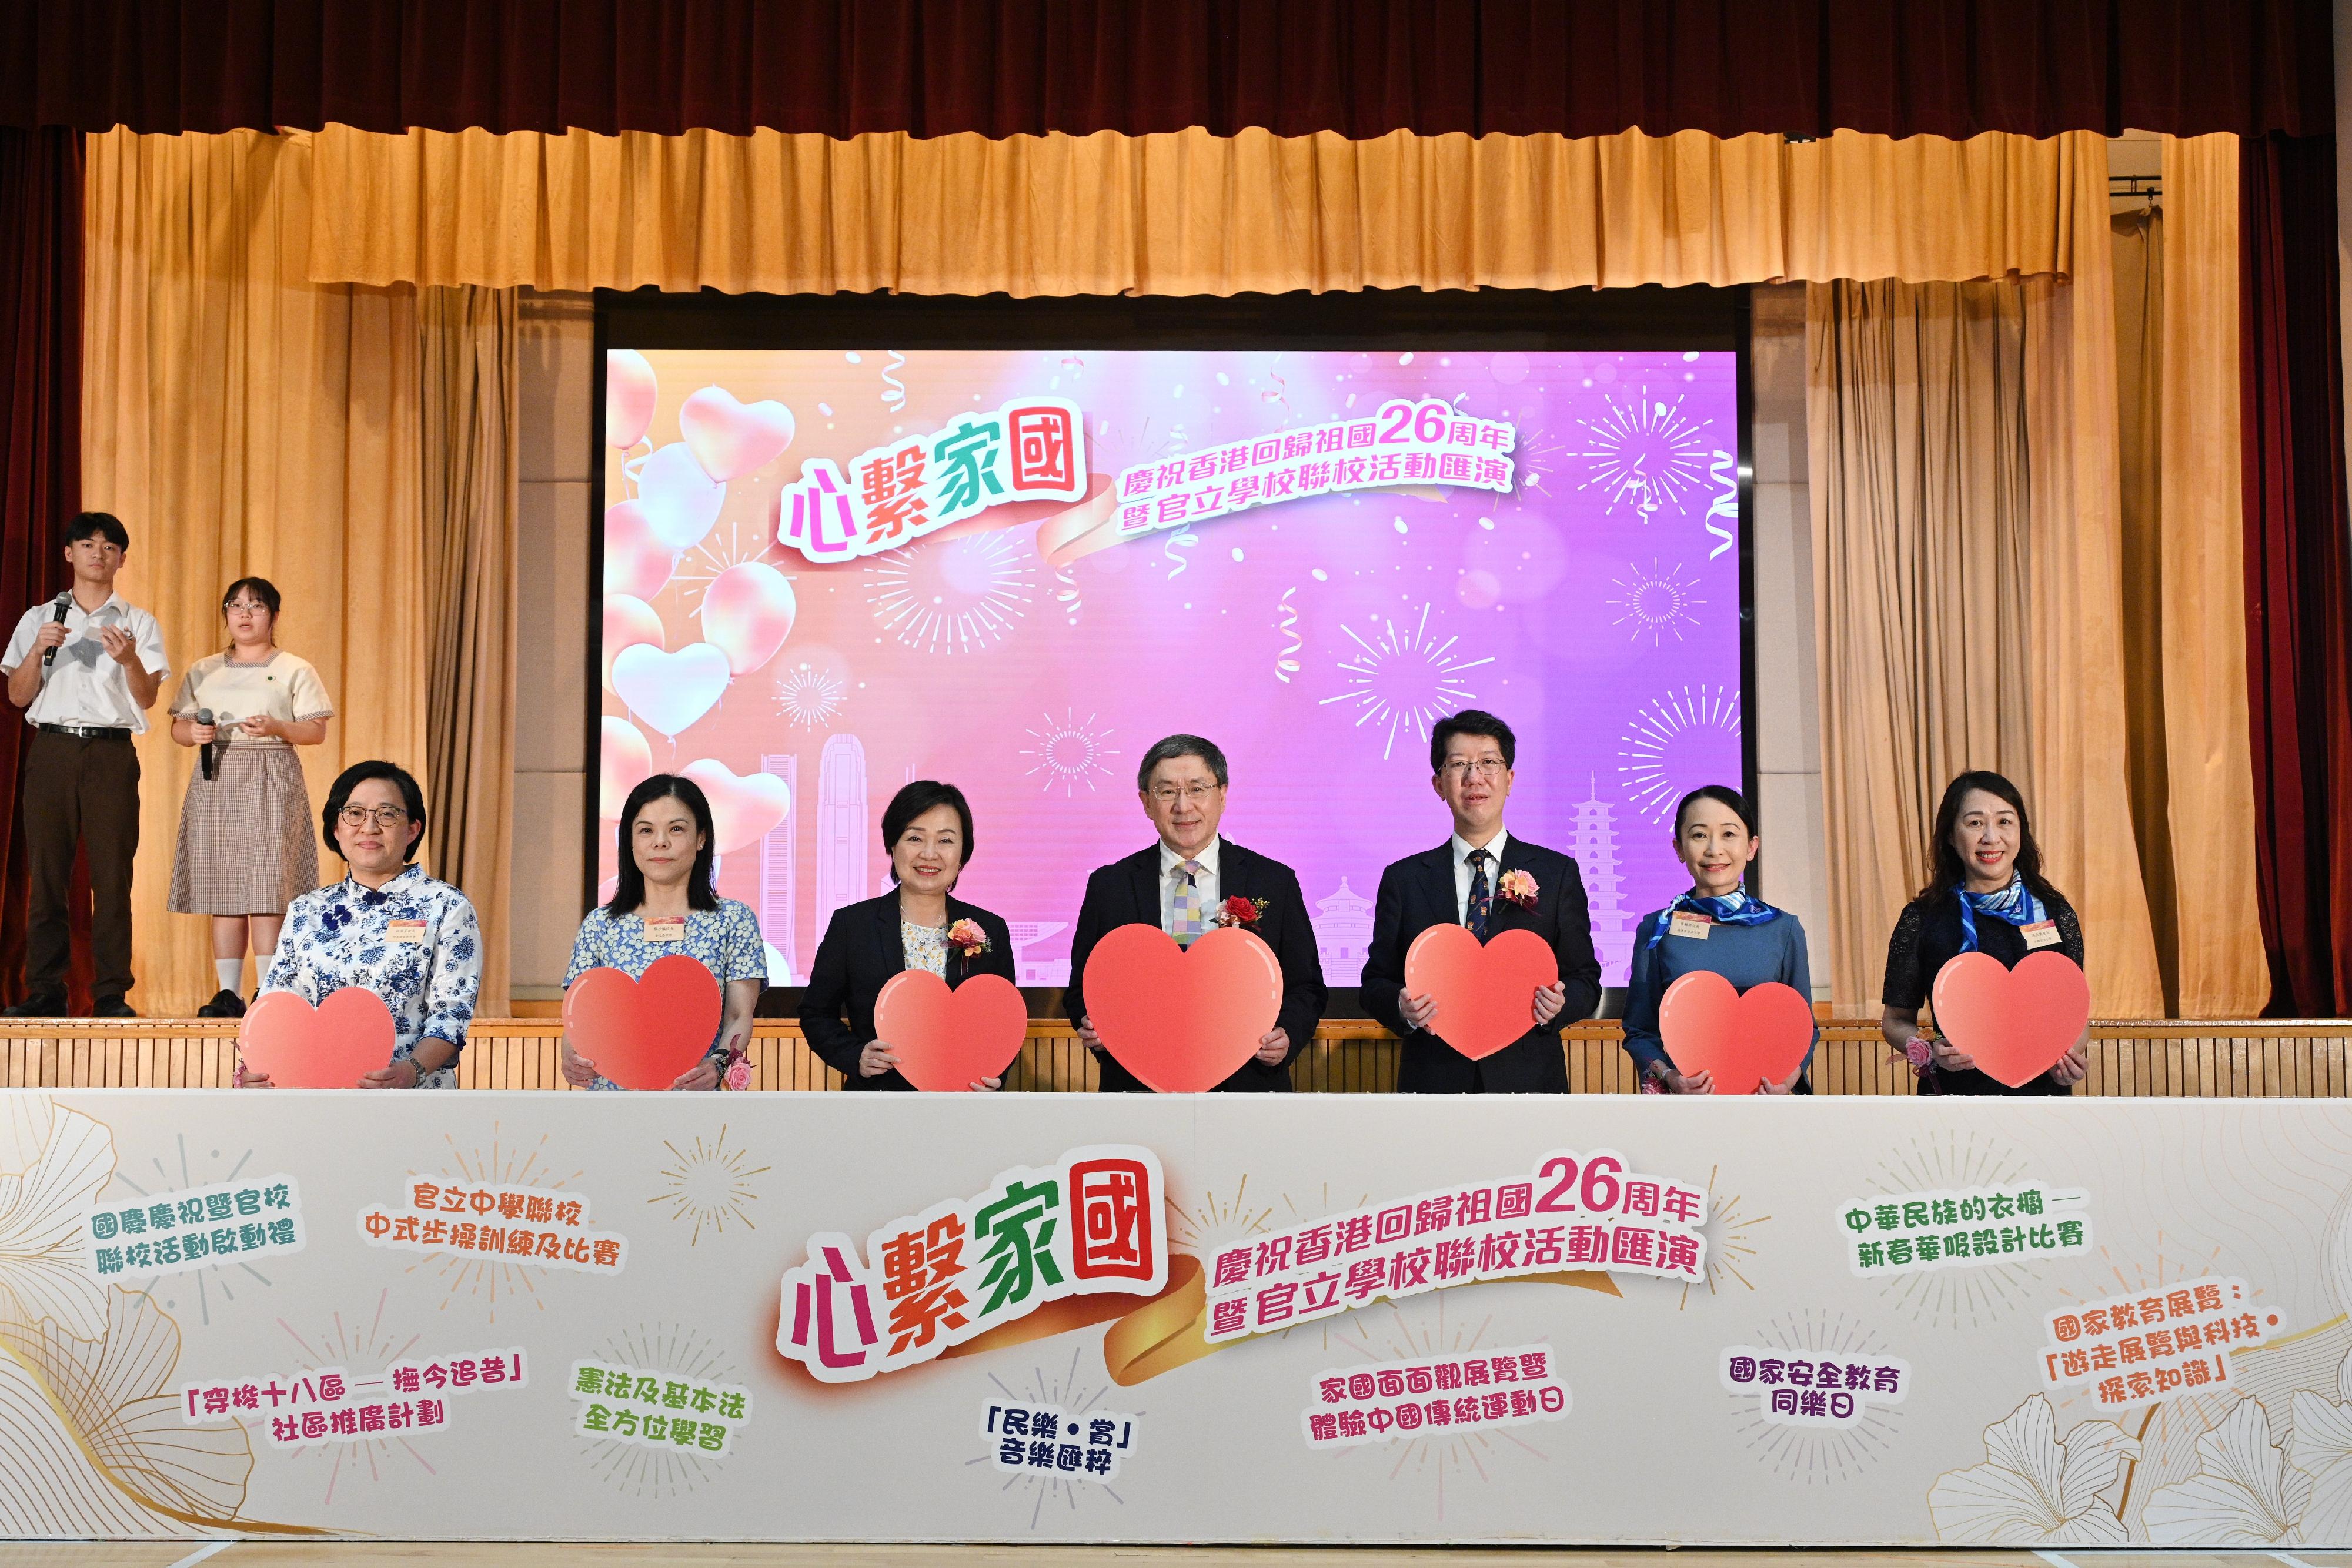 The Education Bureau today (June 30) held the "Love Our Home, Treasure Our Country" Celebration of 26th Anniversary of Hong Kong's Return to the Motherland cum Government Schools Joint School Activities Gala. Photo shows the Deputy Chief Secretary for Administration, Mr Cheuk Wing-hing (centre); the Secretary for Education, Dr Choi Yuk-lin (third left); the Acting Permanent Secretary for Education, Mr Edward To (third right), and other guests officiating at the Gala.